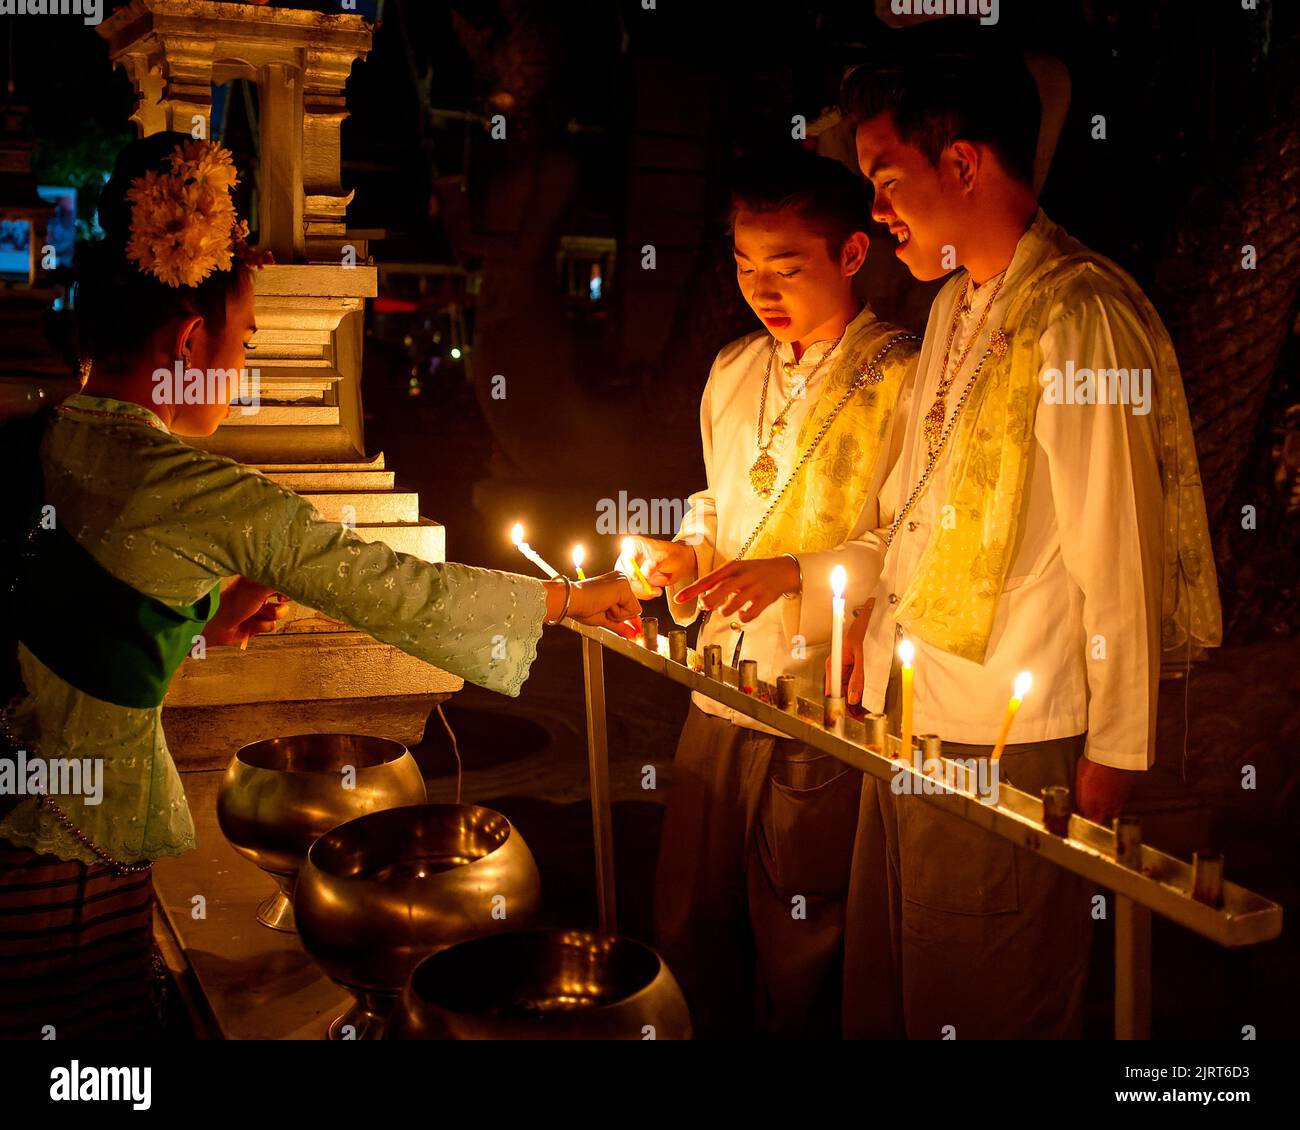 For the 'Chiang Mai Unplugged' festival, there was a candlelight ceremony at Wat Srisuphan, a Buddhist temple in Chiang Mai, Thailand Stock Photo